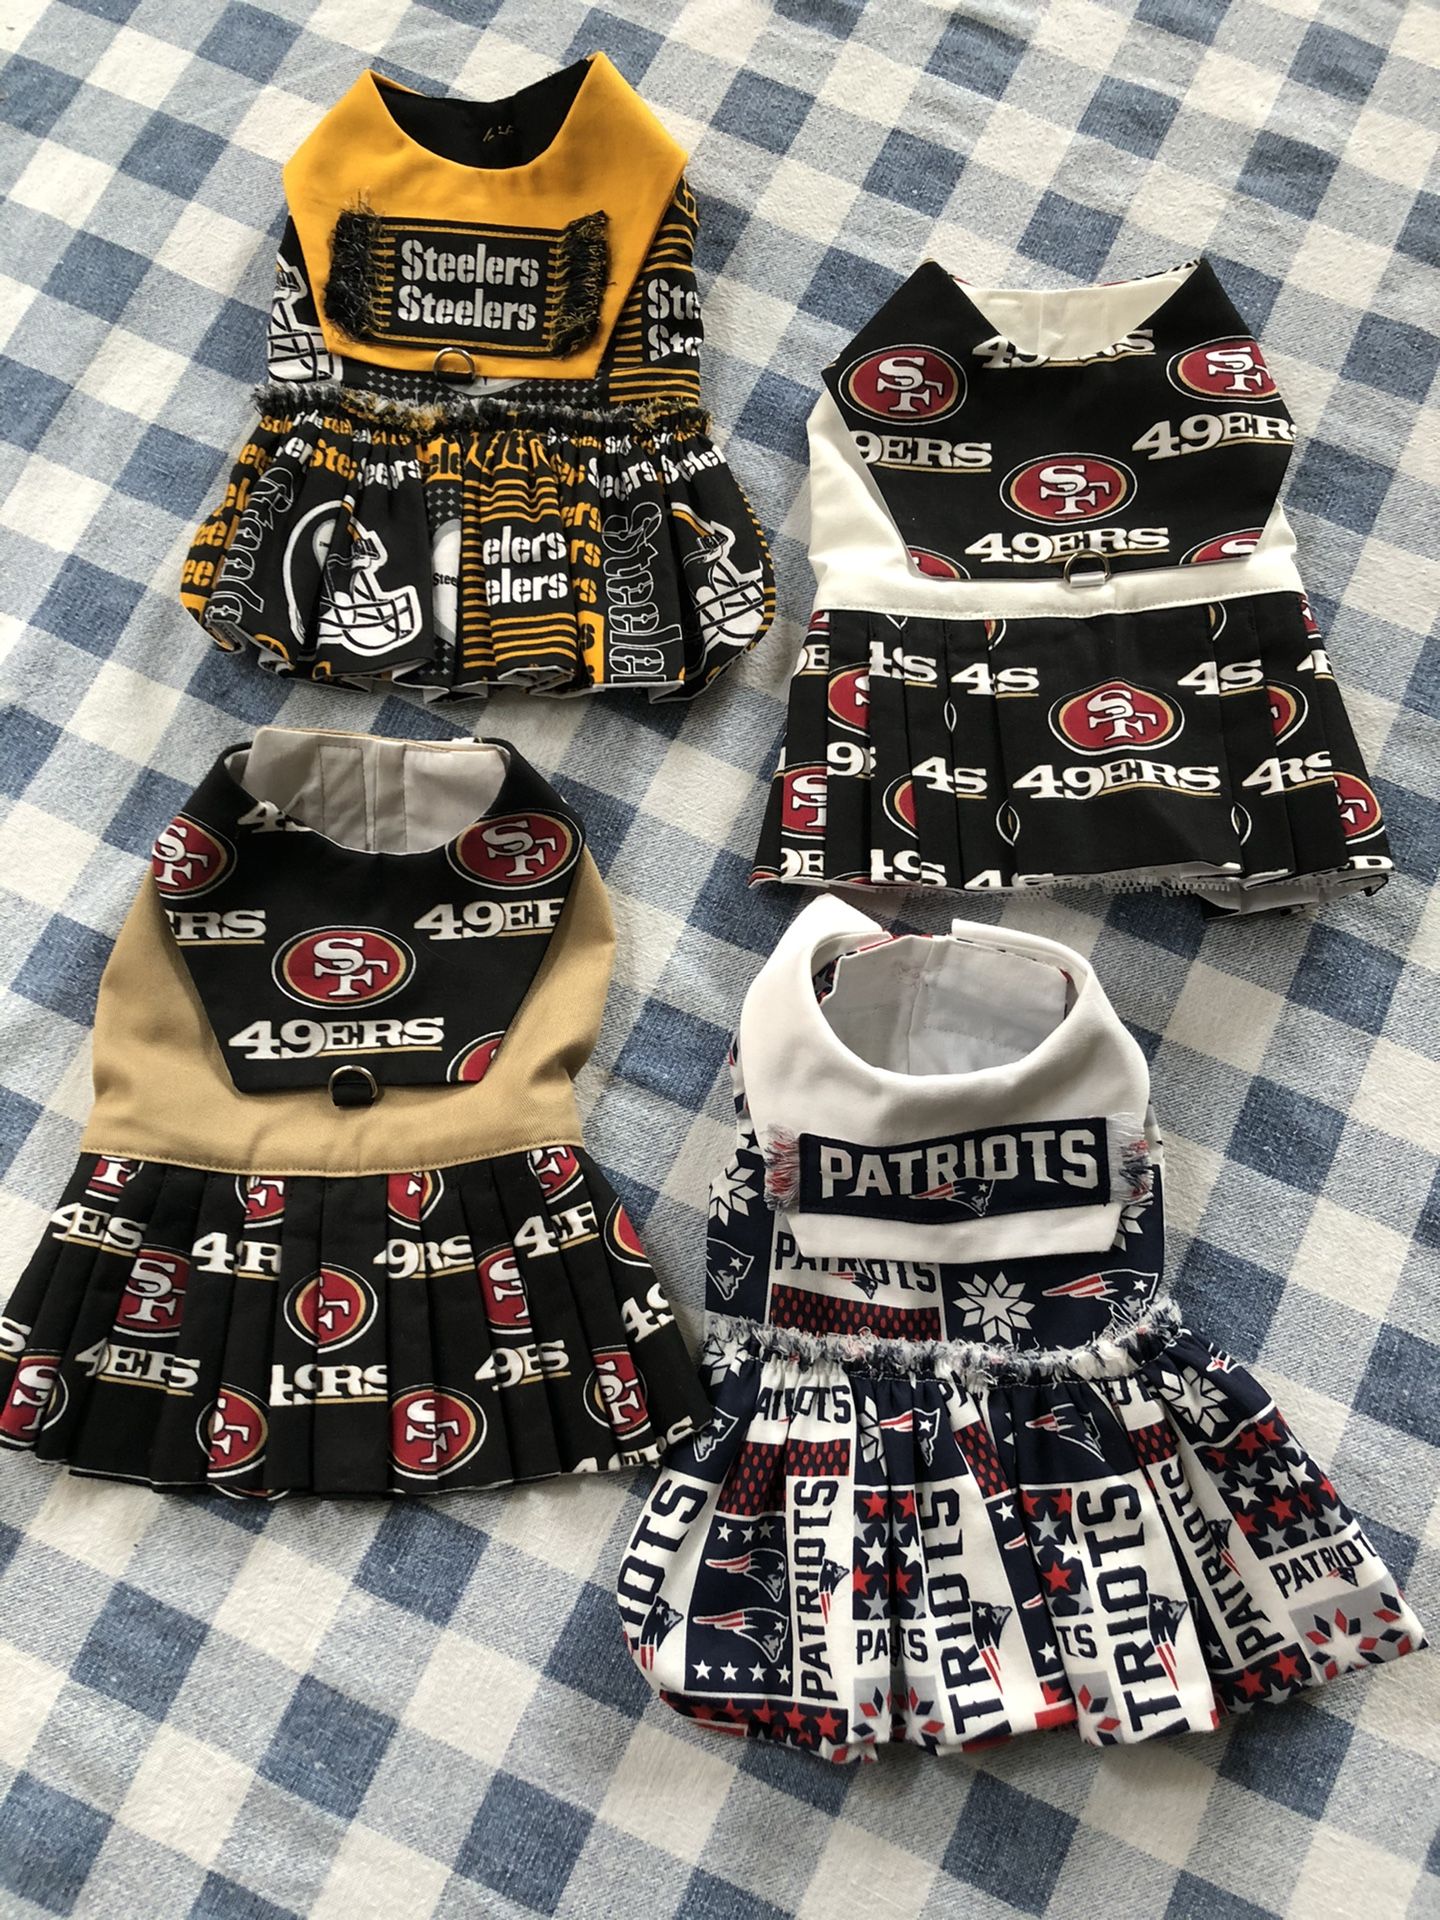 Dog outfit (5 pounds or so) - 49ers, Patriots, Steelers - Hand sewn